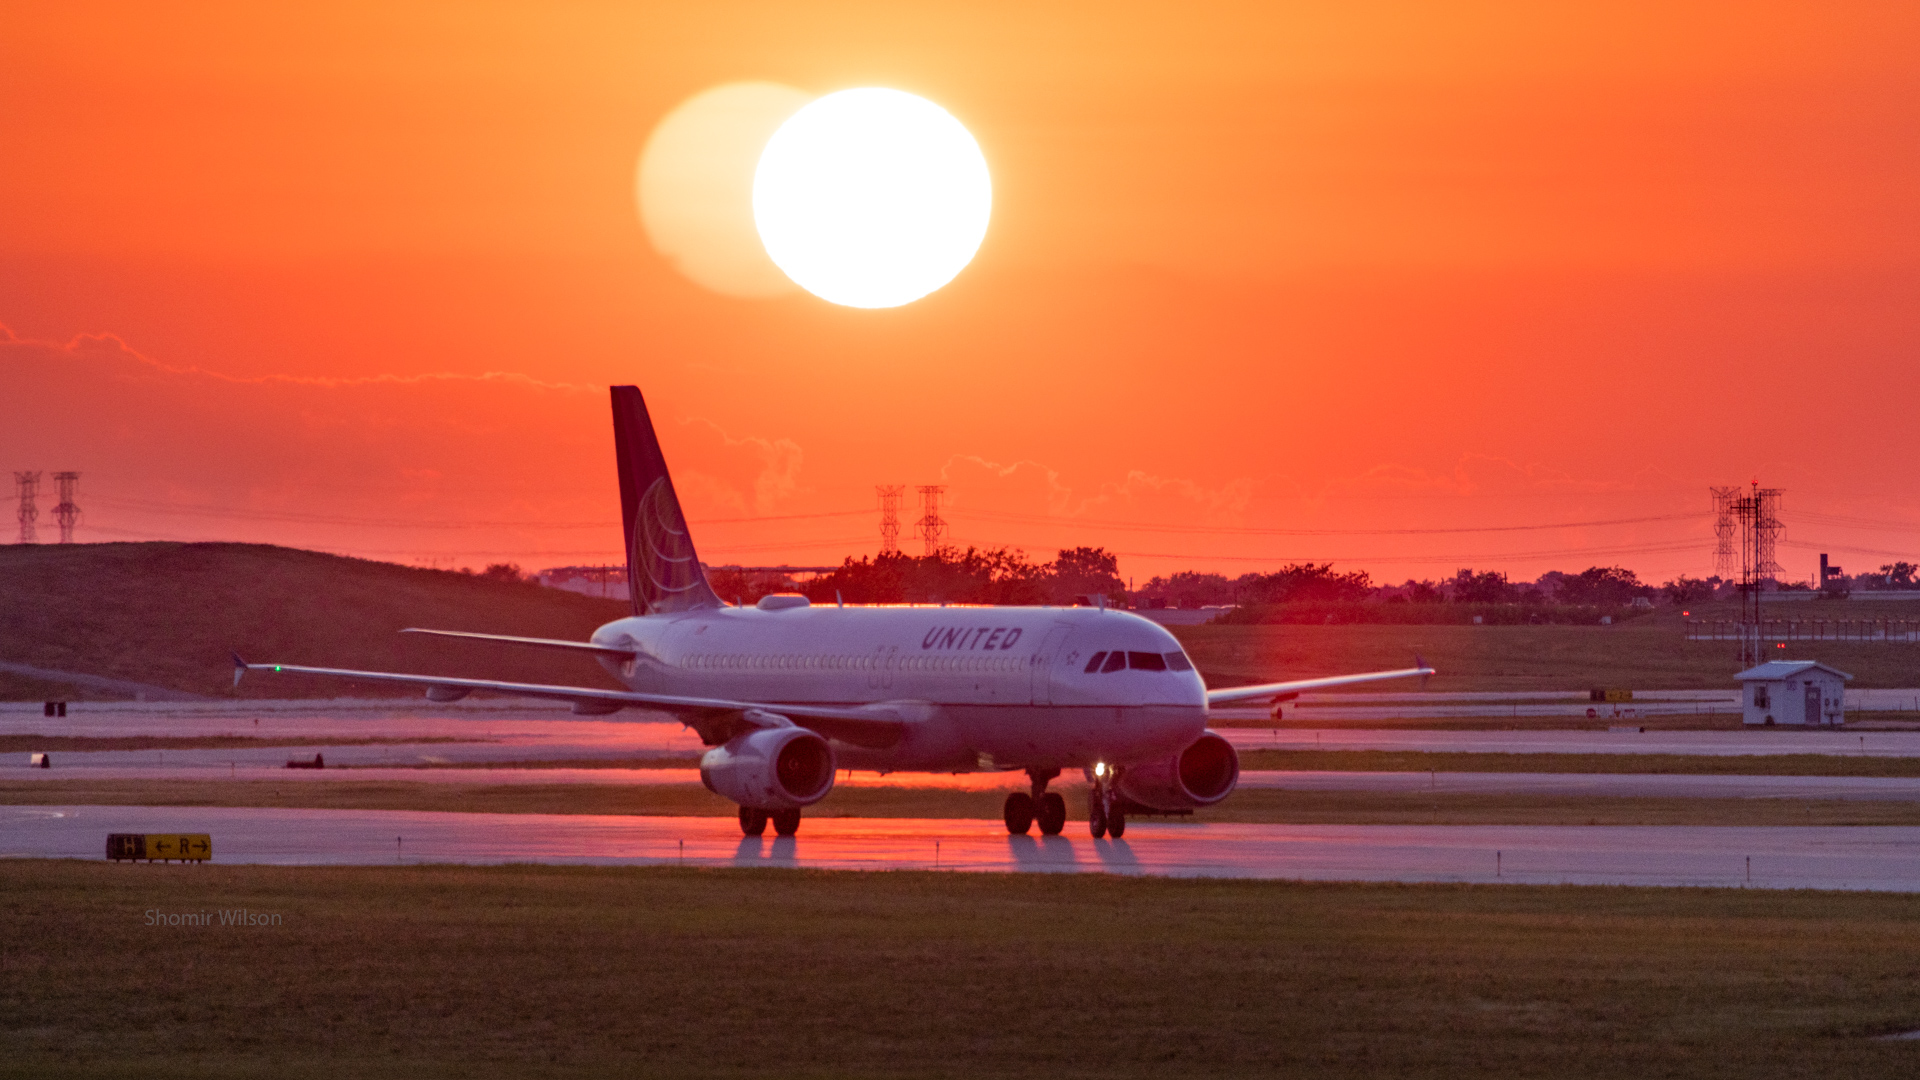 United passenger jet on a runway with a brilliant red sun and sunset above